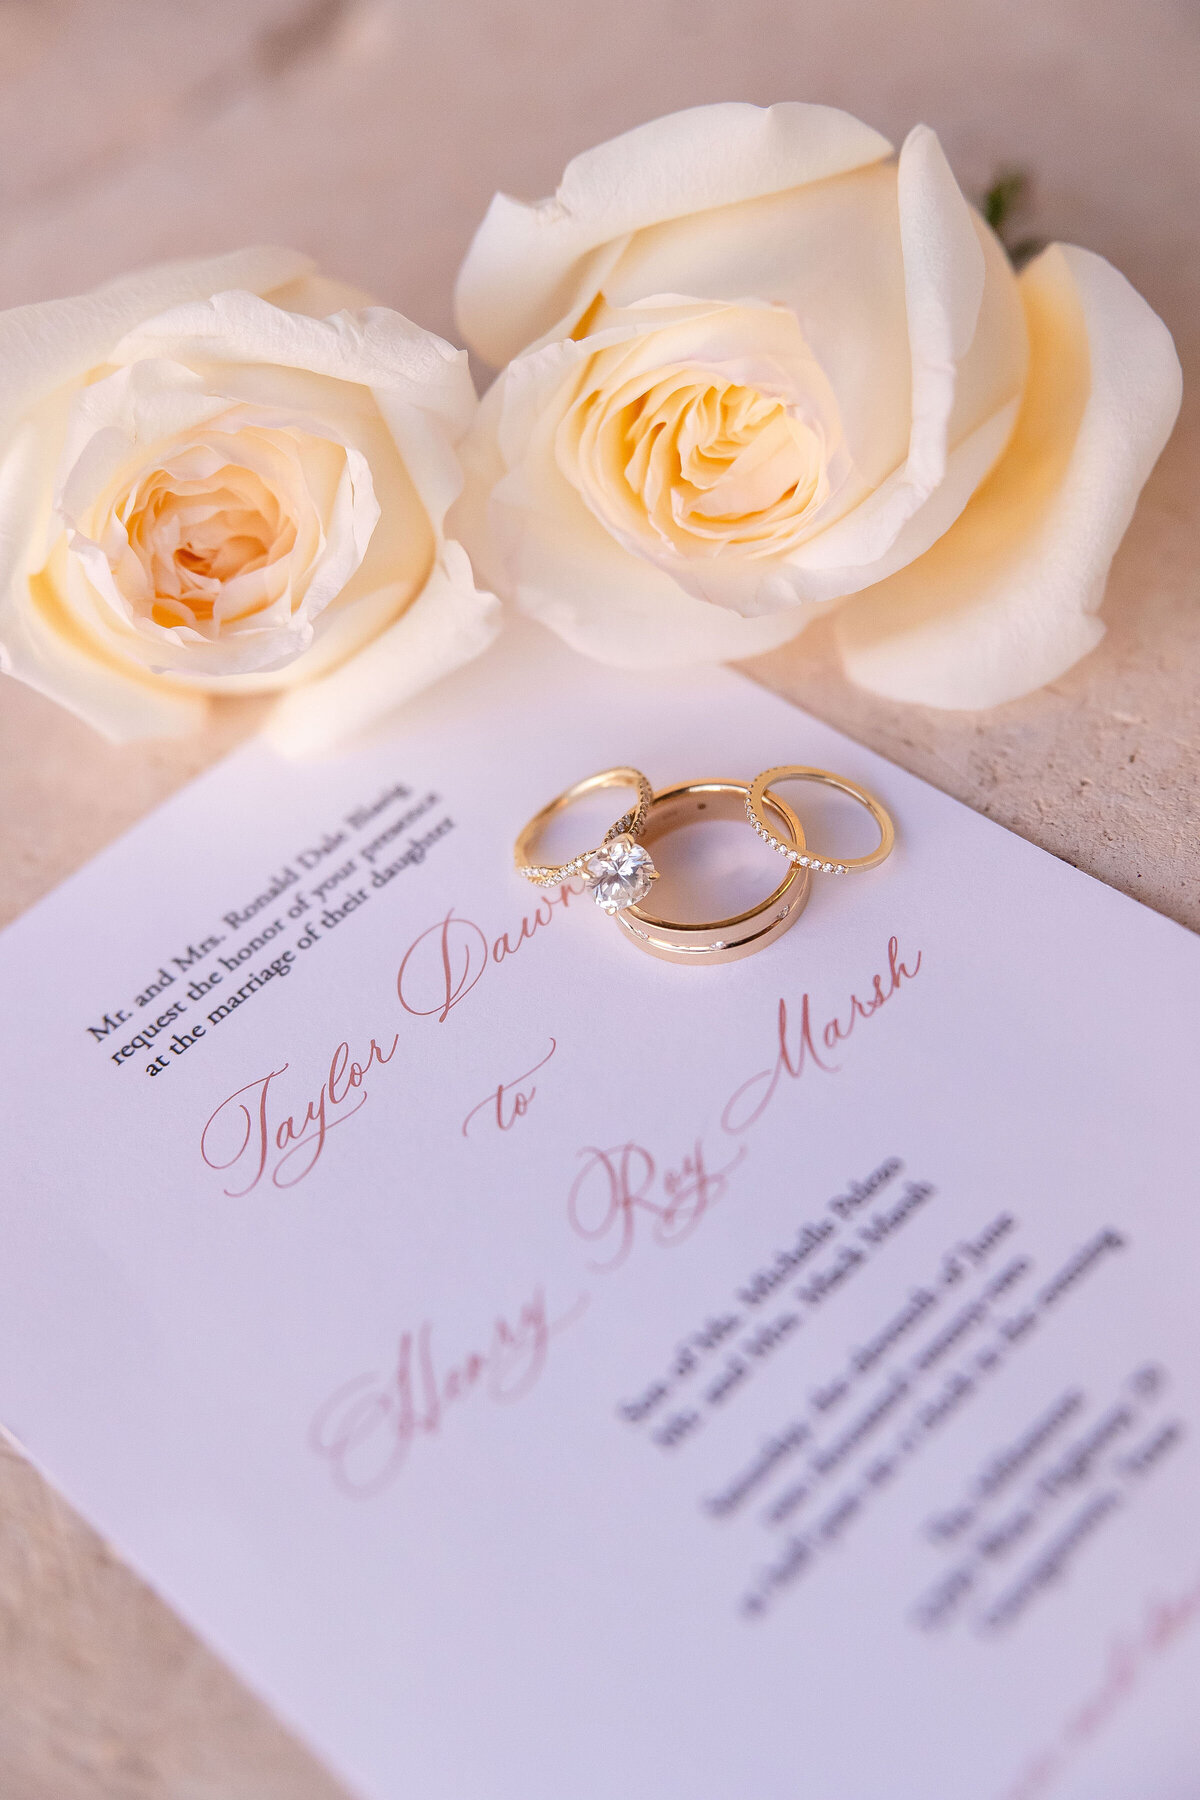 rings invitation and cream roses for wedding at Milestone Georgetown Texas by Firefly Photography